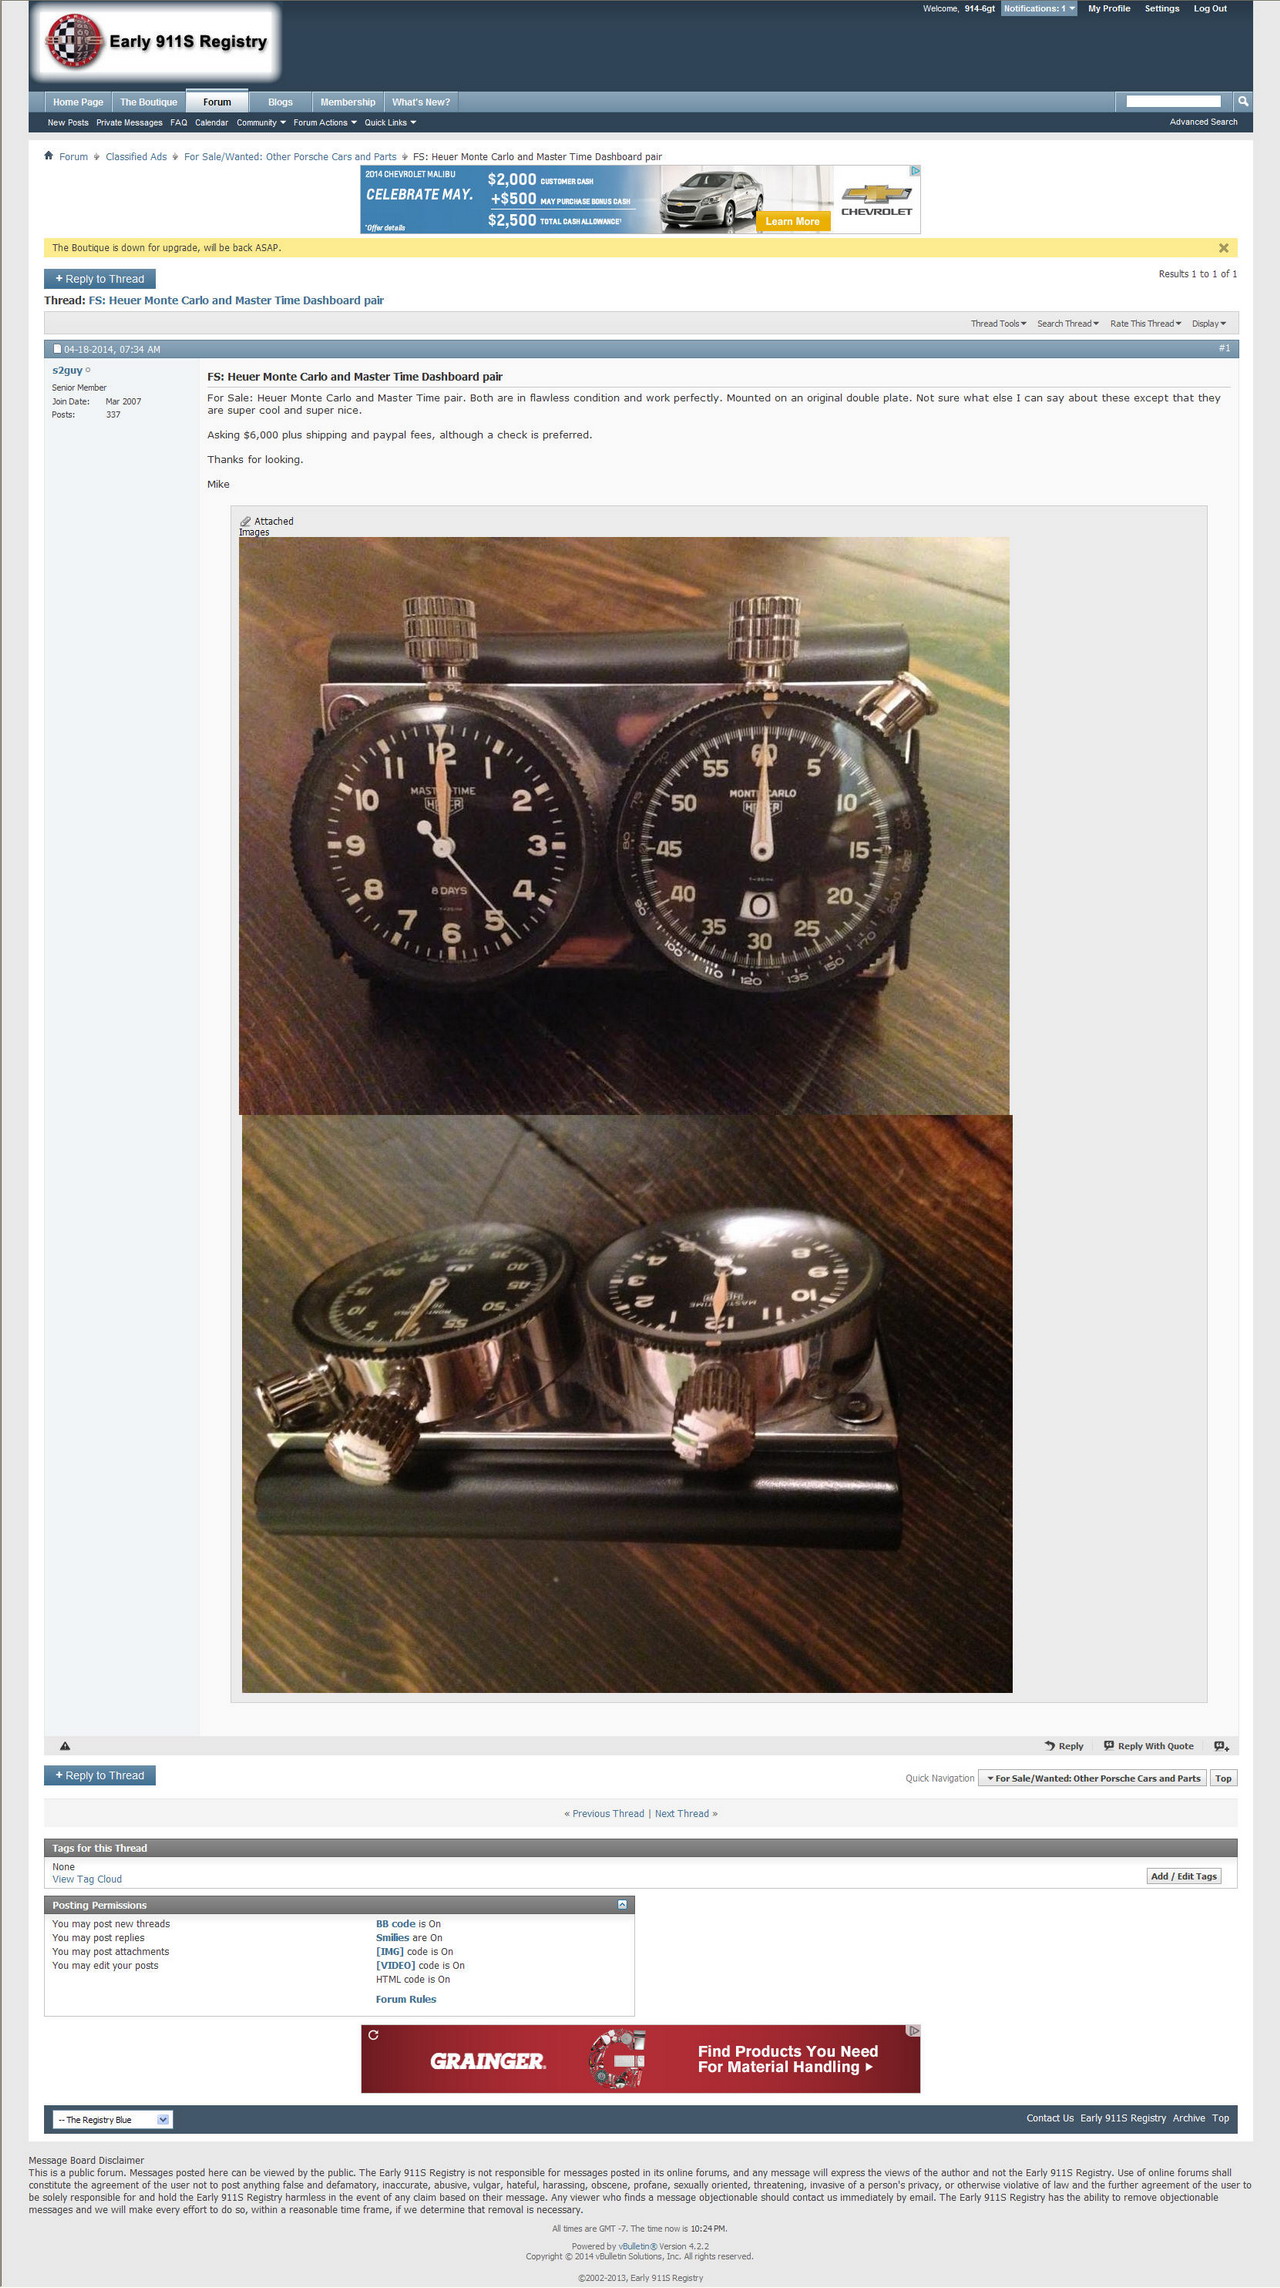 Heuer Master Time 8-Day & Monte Carlo 2B Used - Early911S Asking 6K